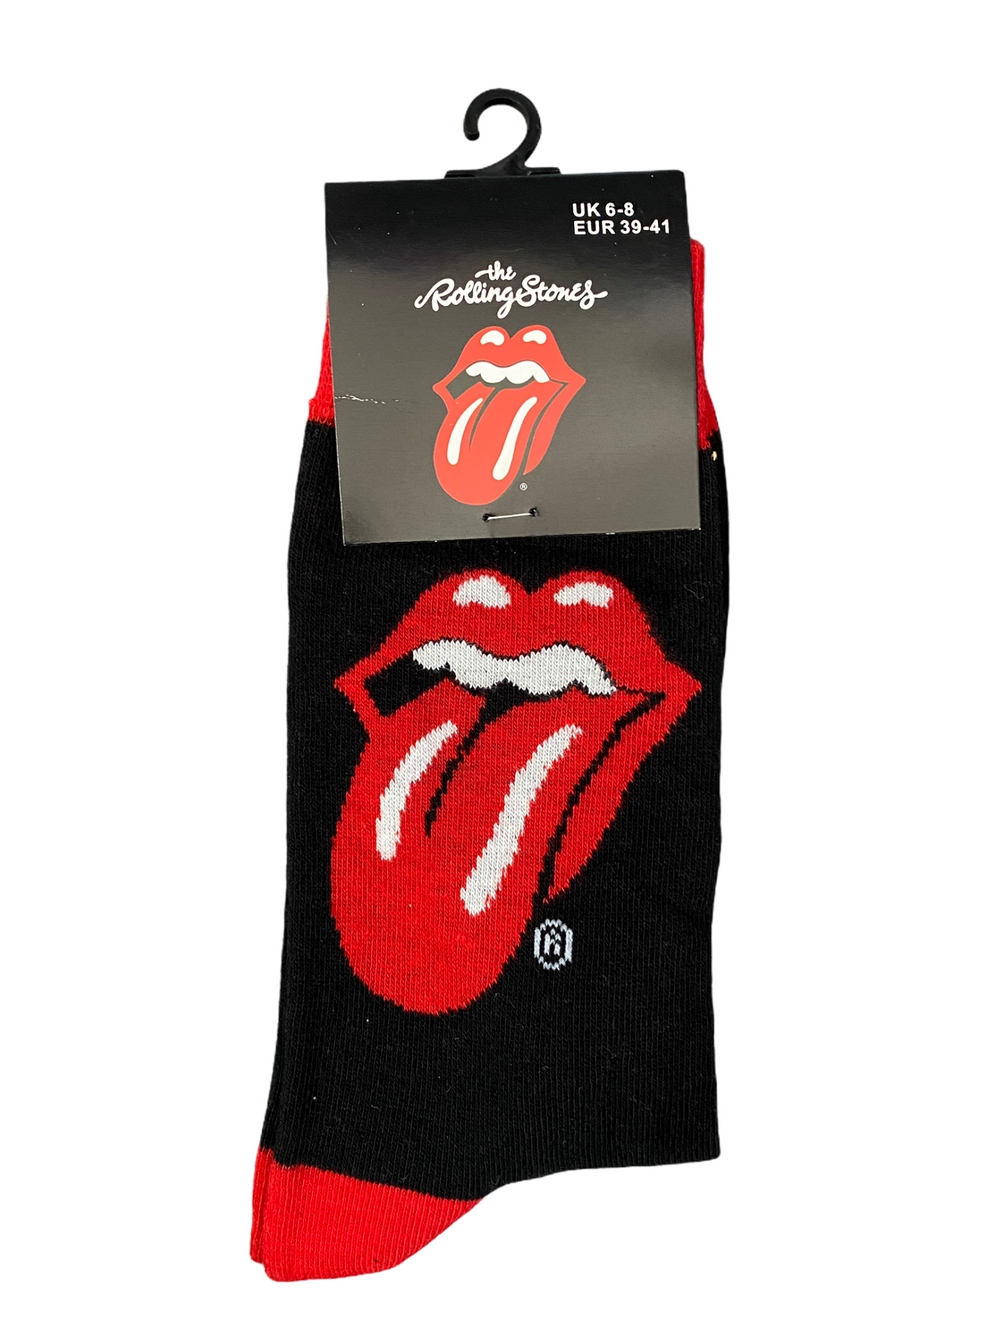 Rolling Stones The -  Official Product 1 Pair Jacquard Socks Size 6 - 8 UK NEW